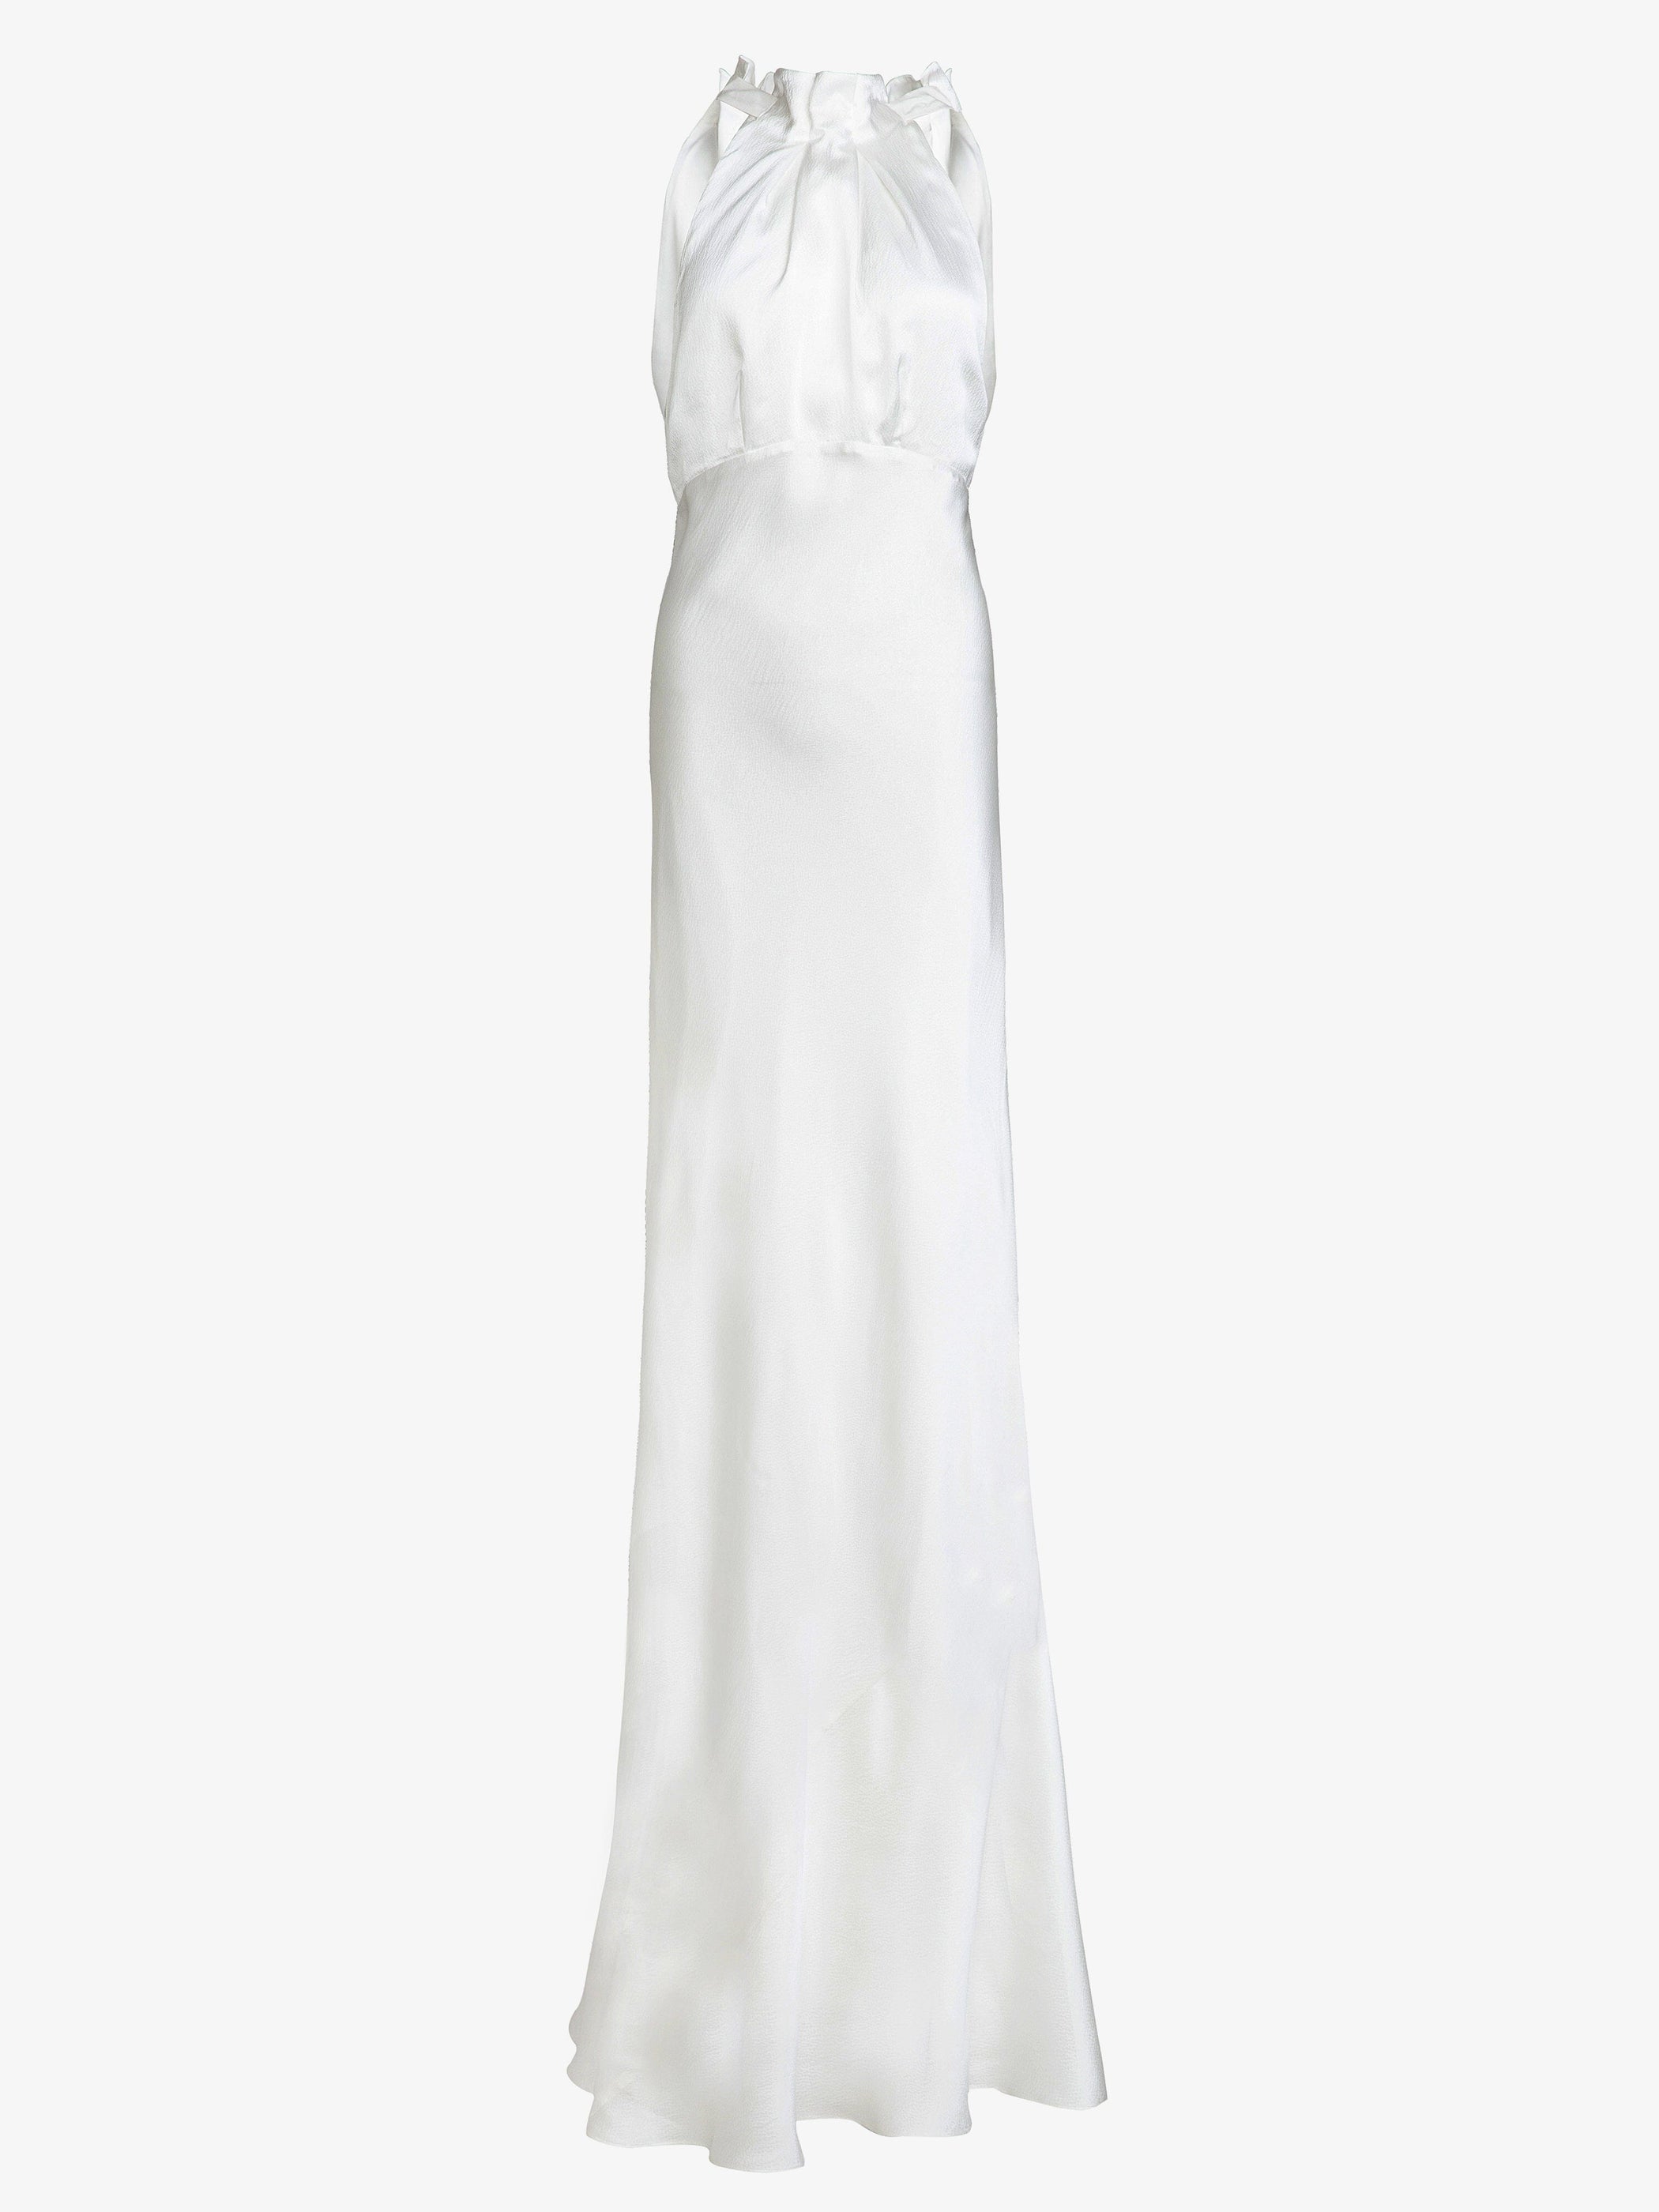 Michelle Dress in Ivory